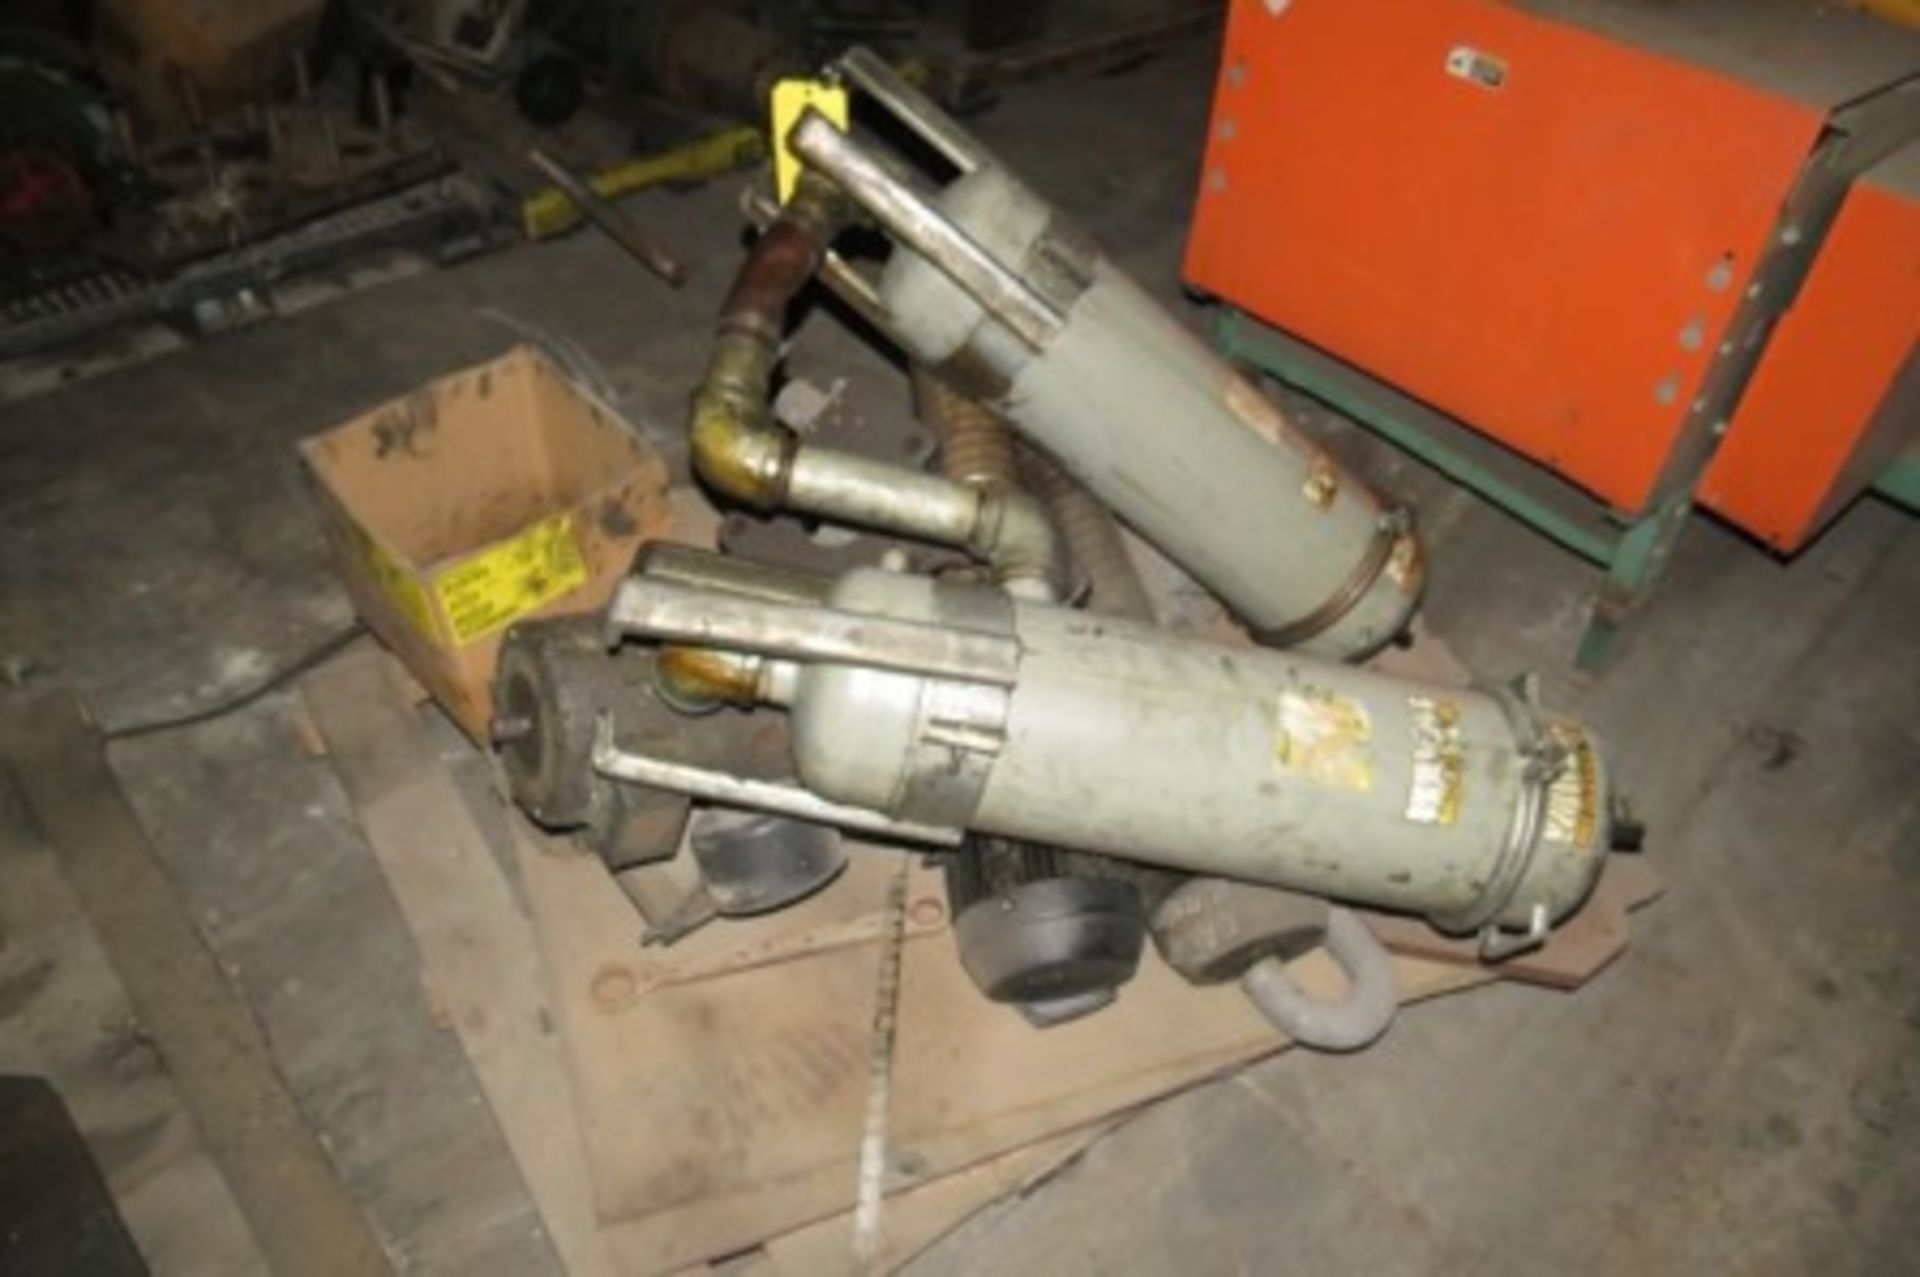 Electric motor 50 hp. Spare parts for die casting machines. Belt conveyor - Image 11 of 19